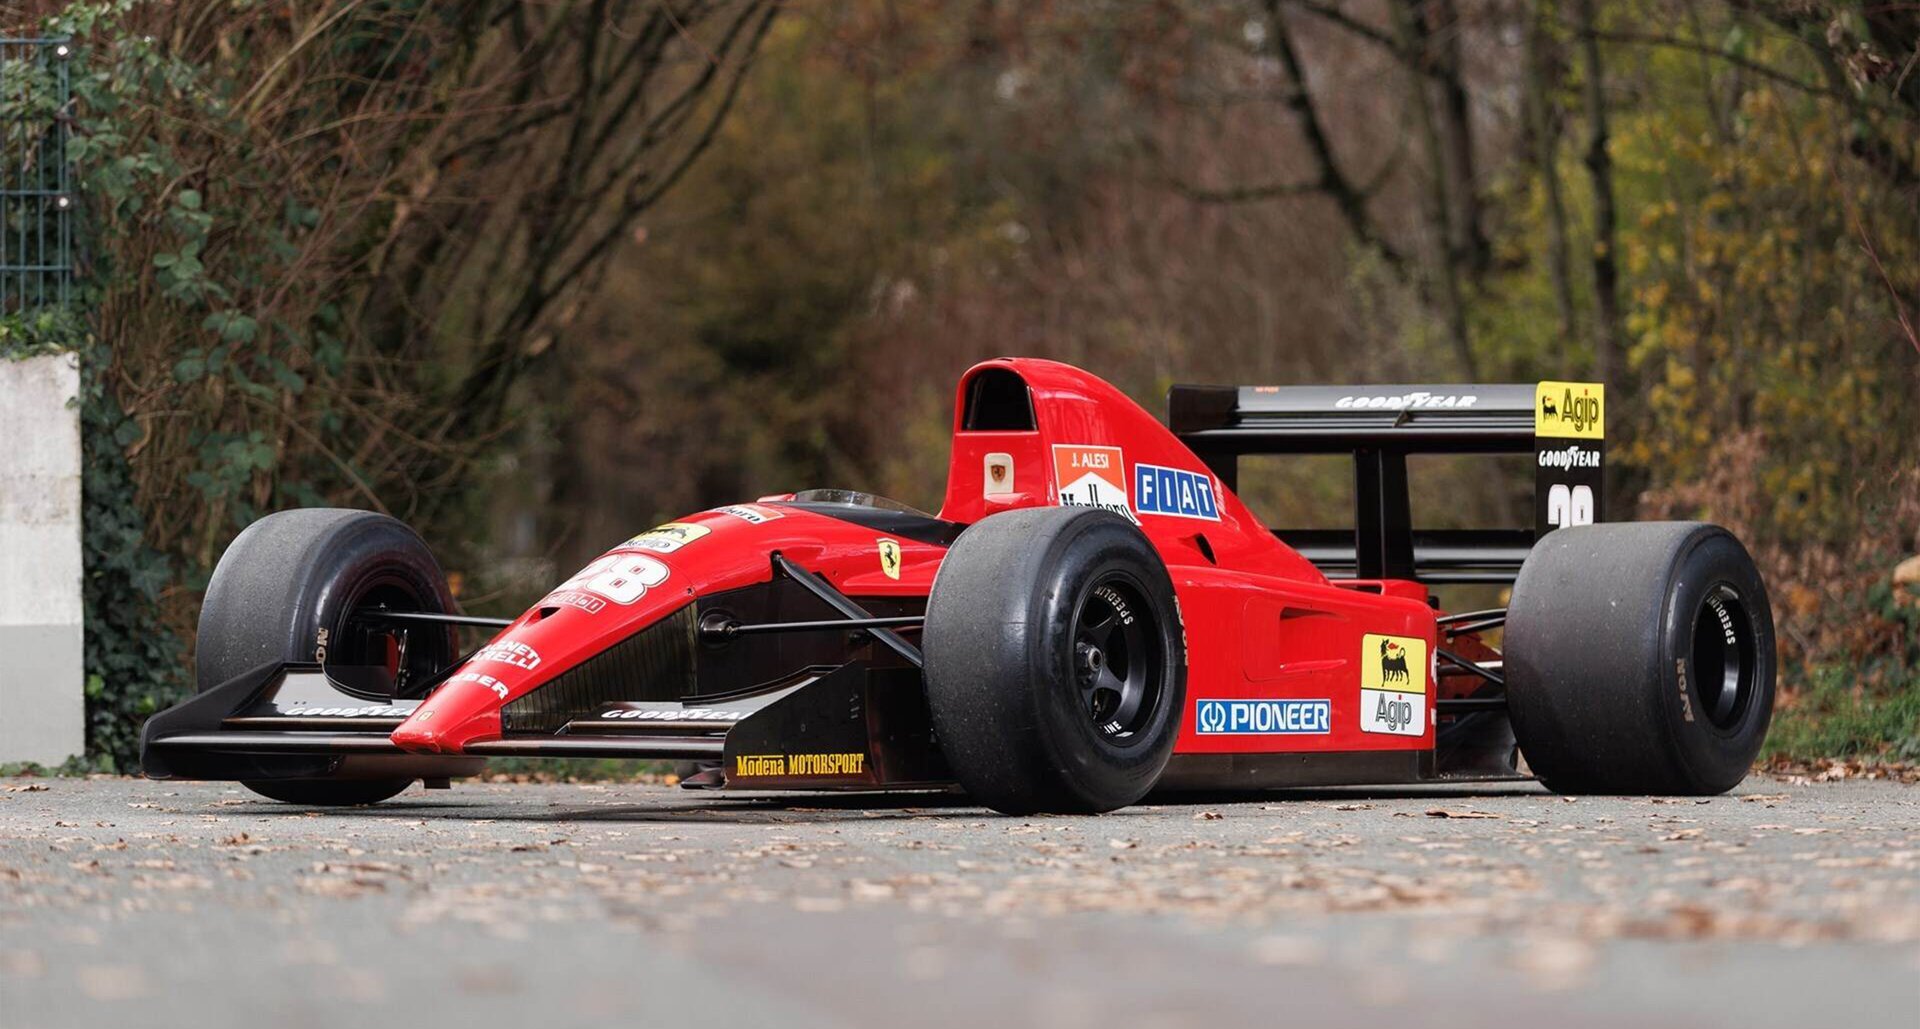 Buying this Formula 1 Ferrari is the easy part! Here's how to own and drive  it